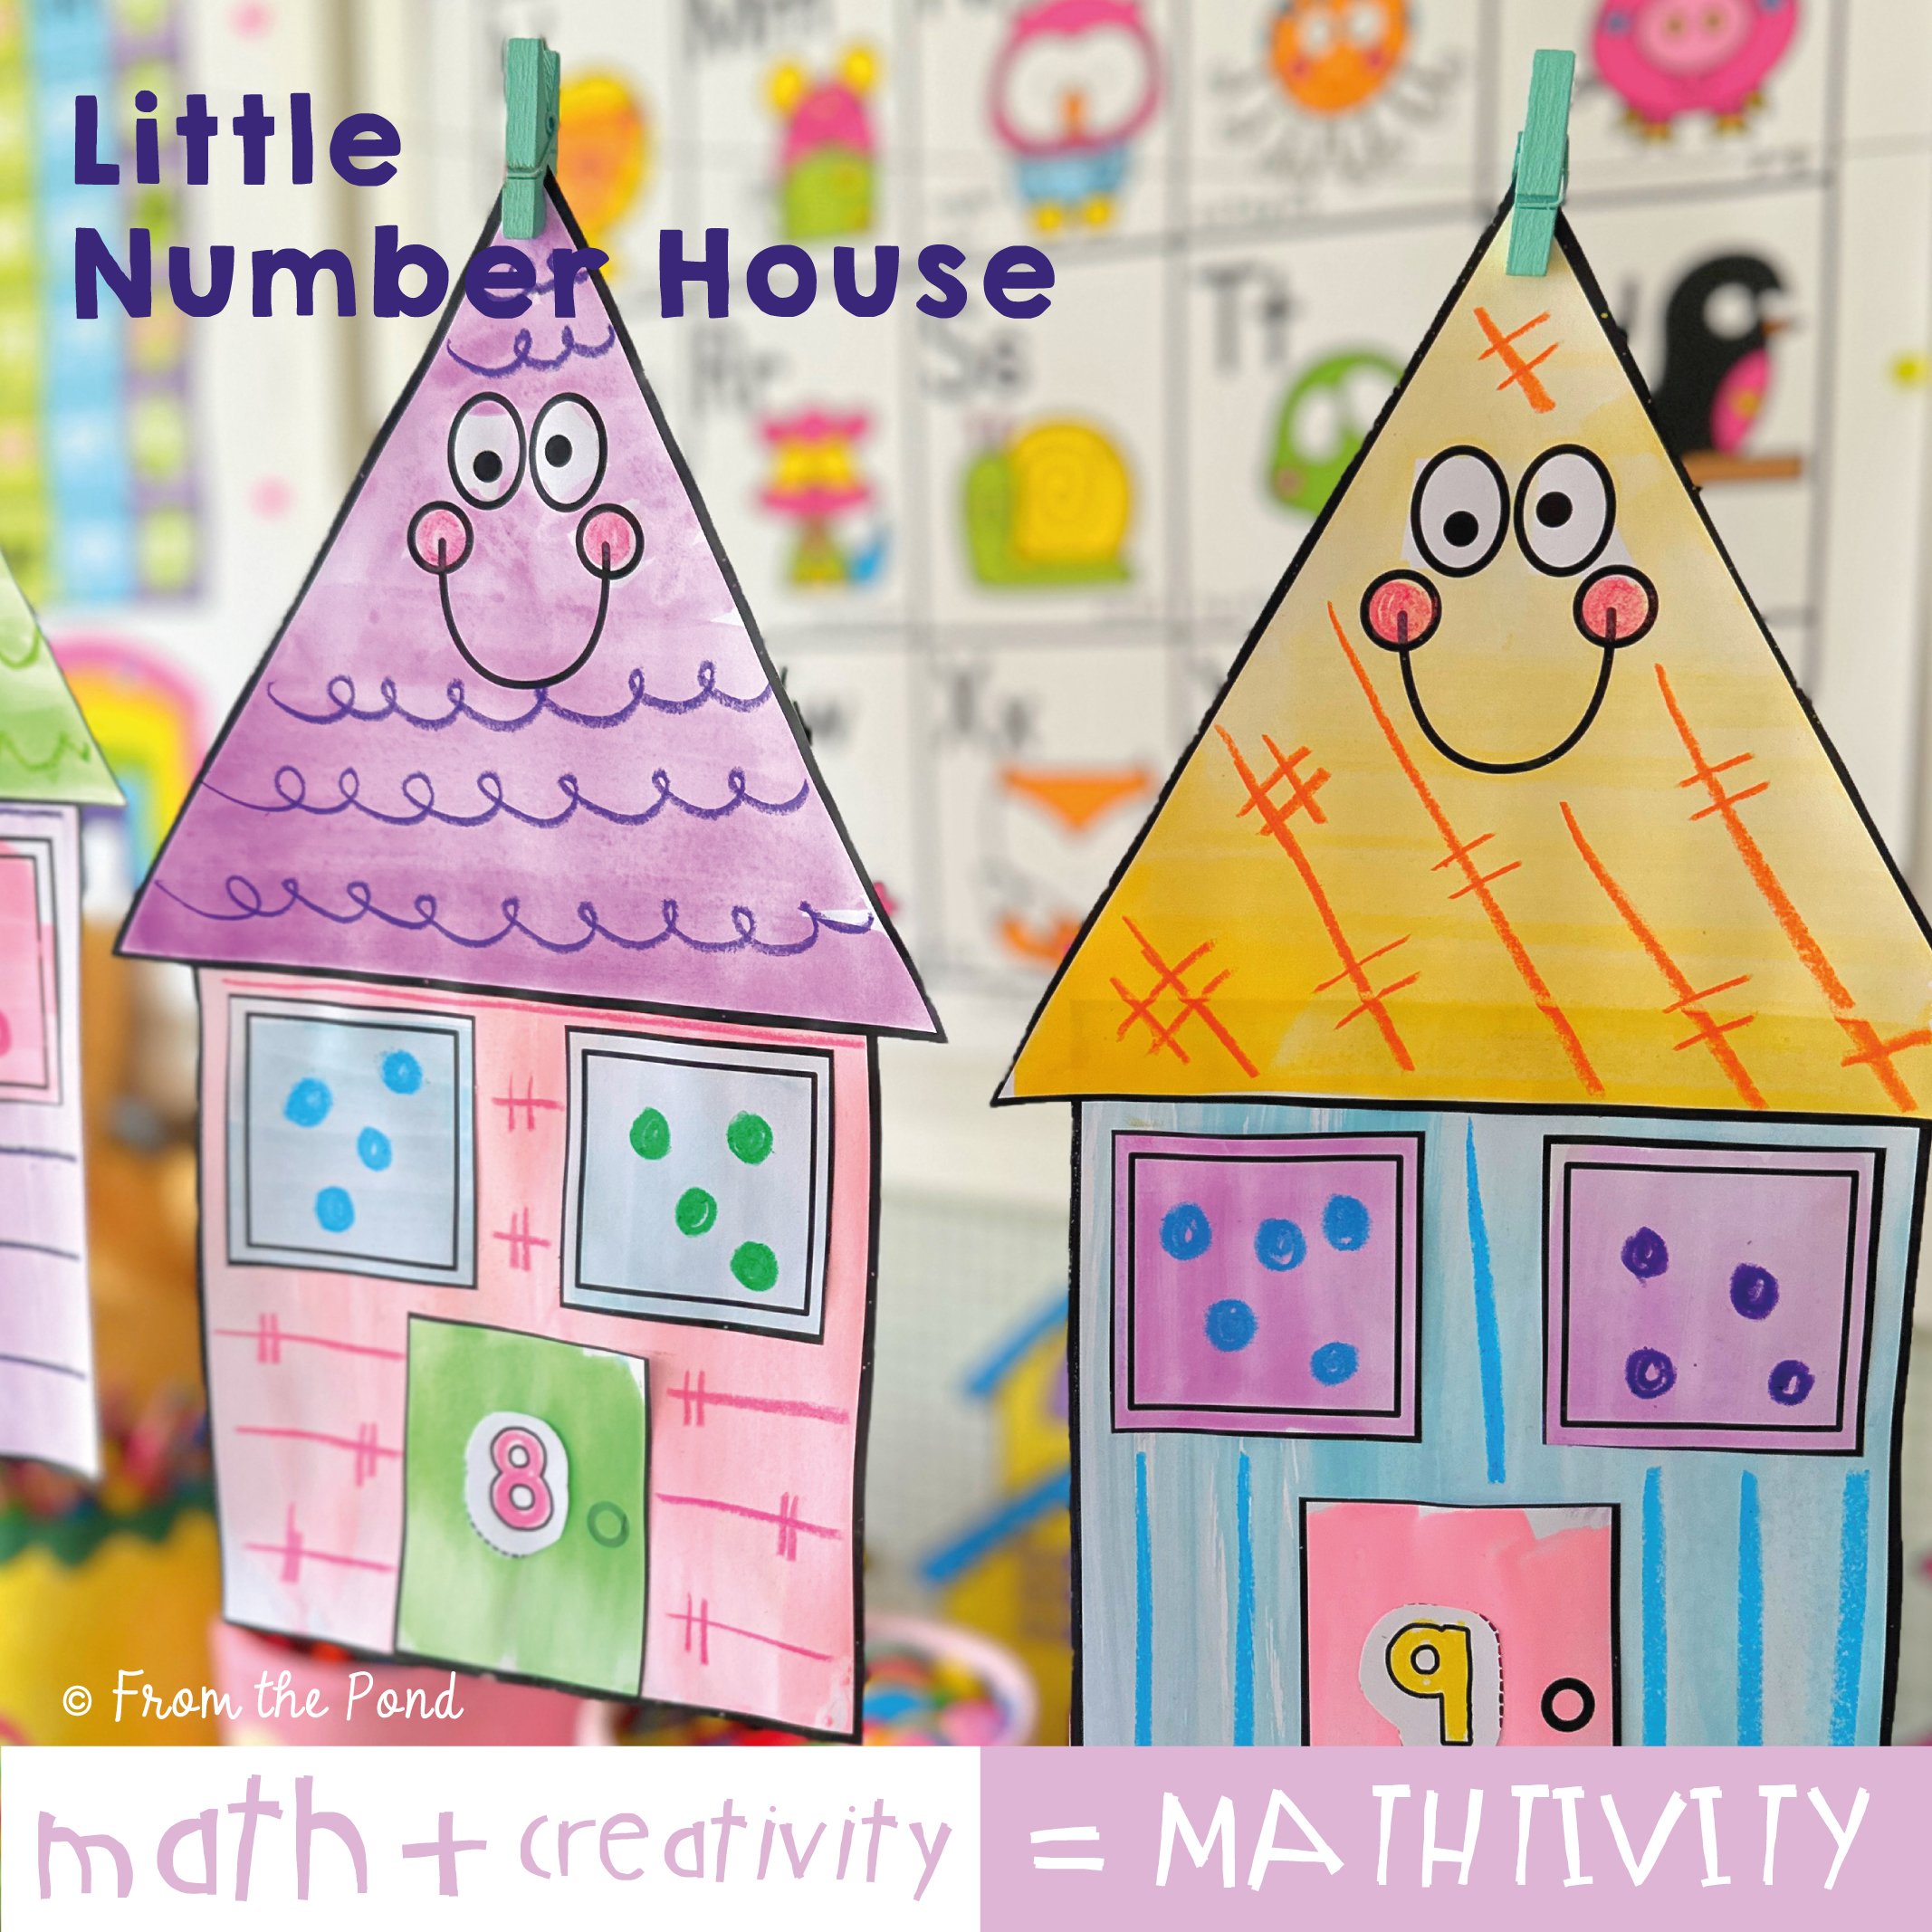 Little Number House